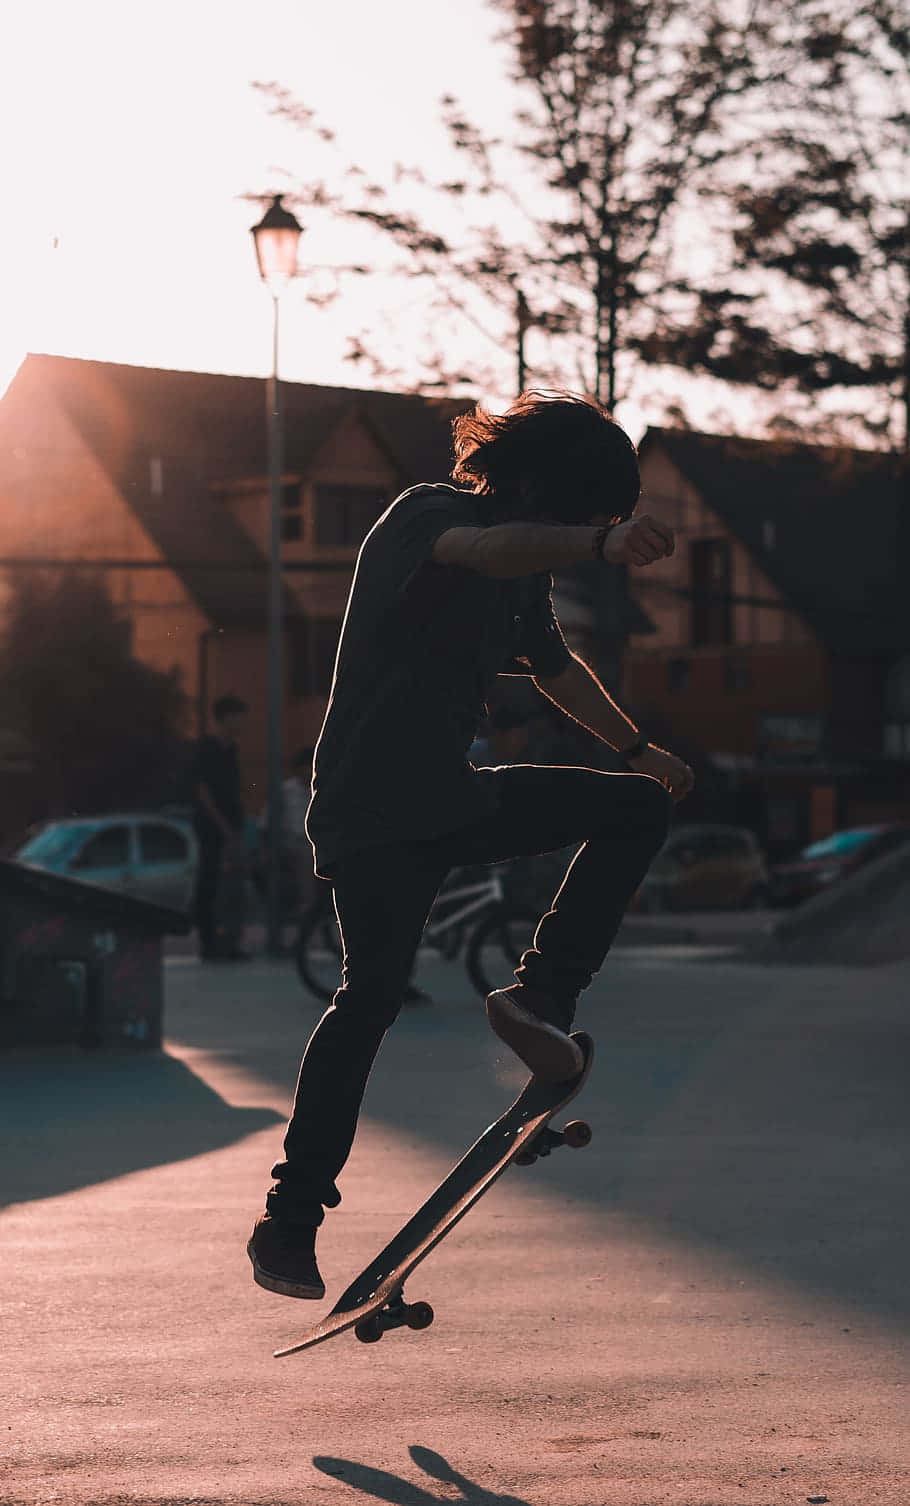 A Person Doing A Trick On A Skateboard